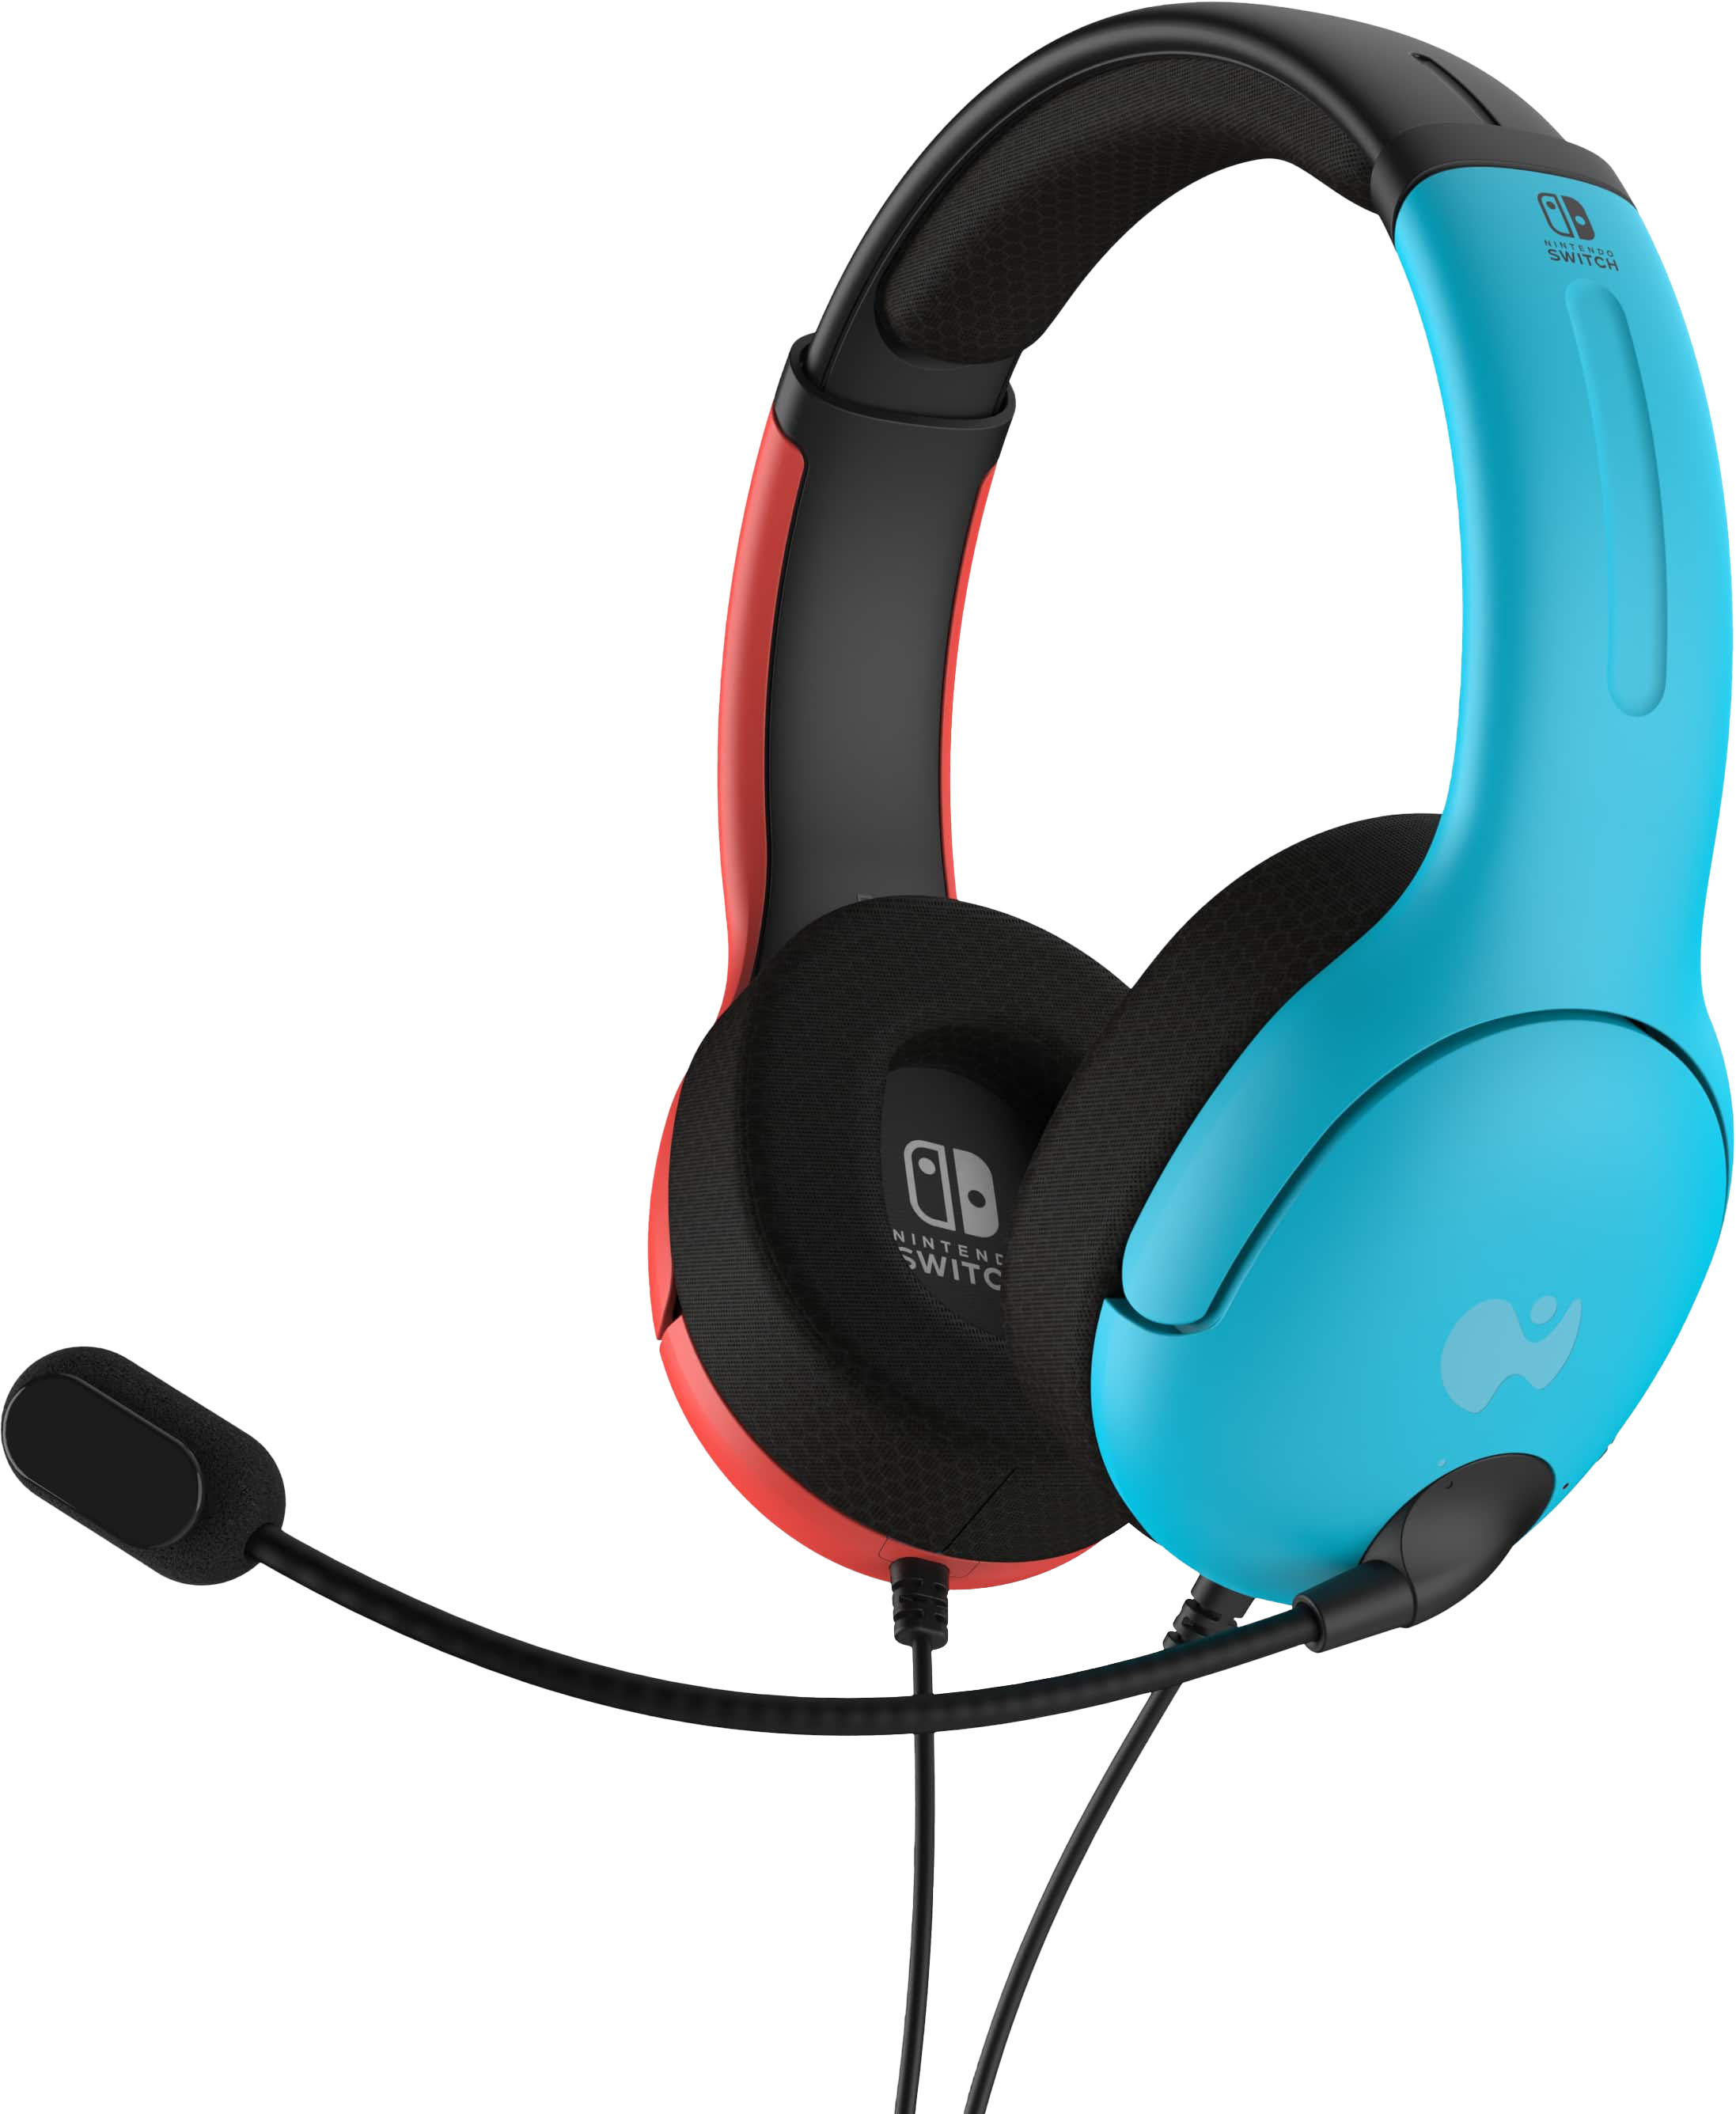 PDP Lvl40 Wired Headset - Nintendo Switch